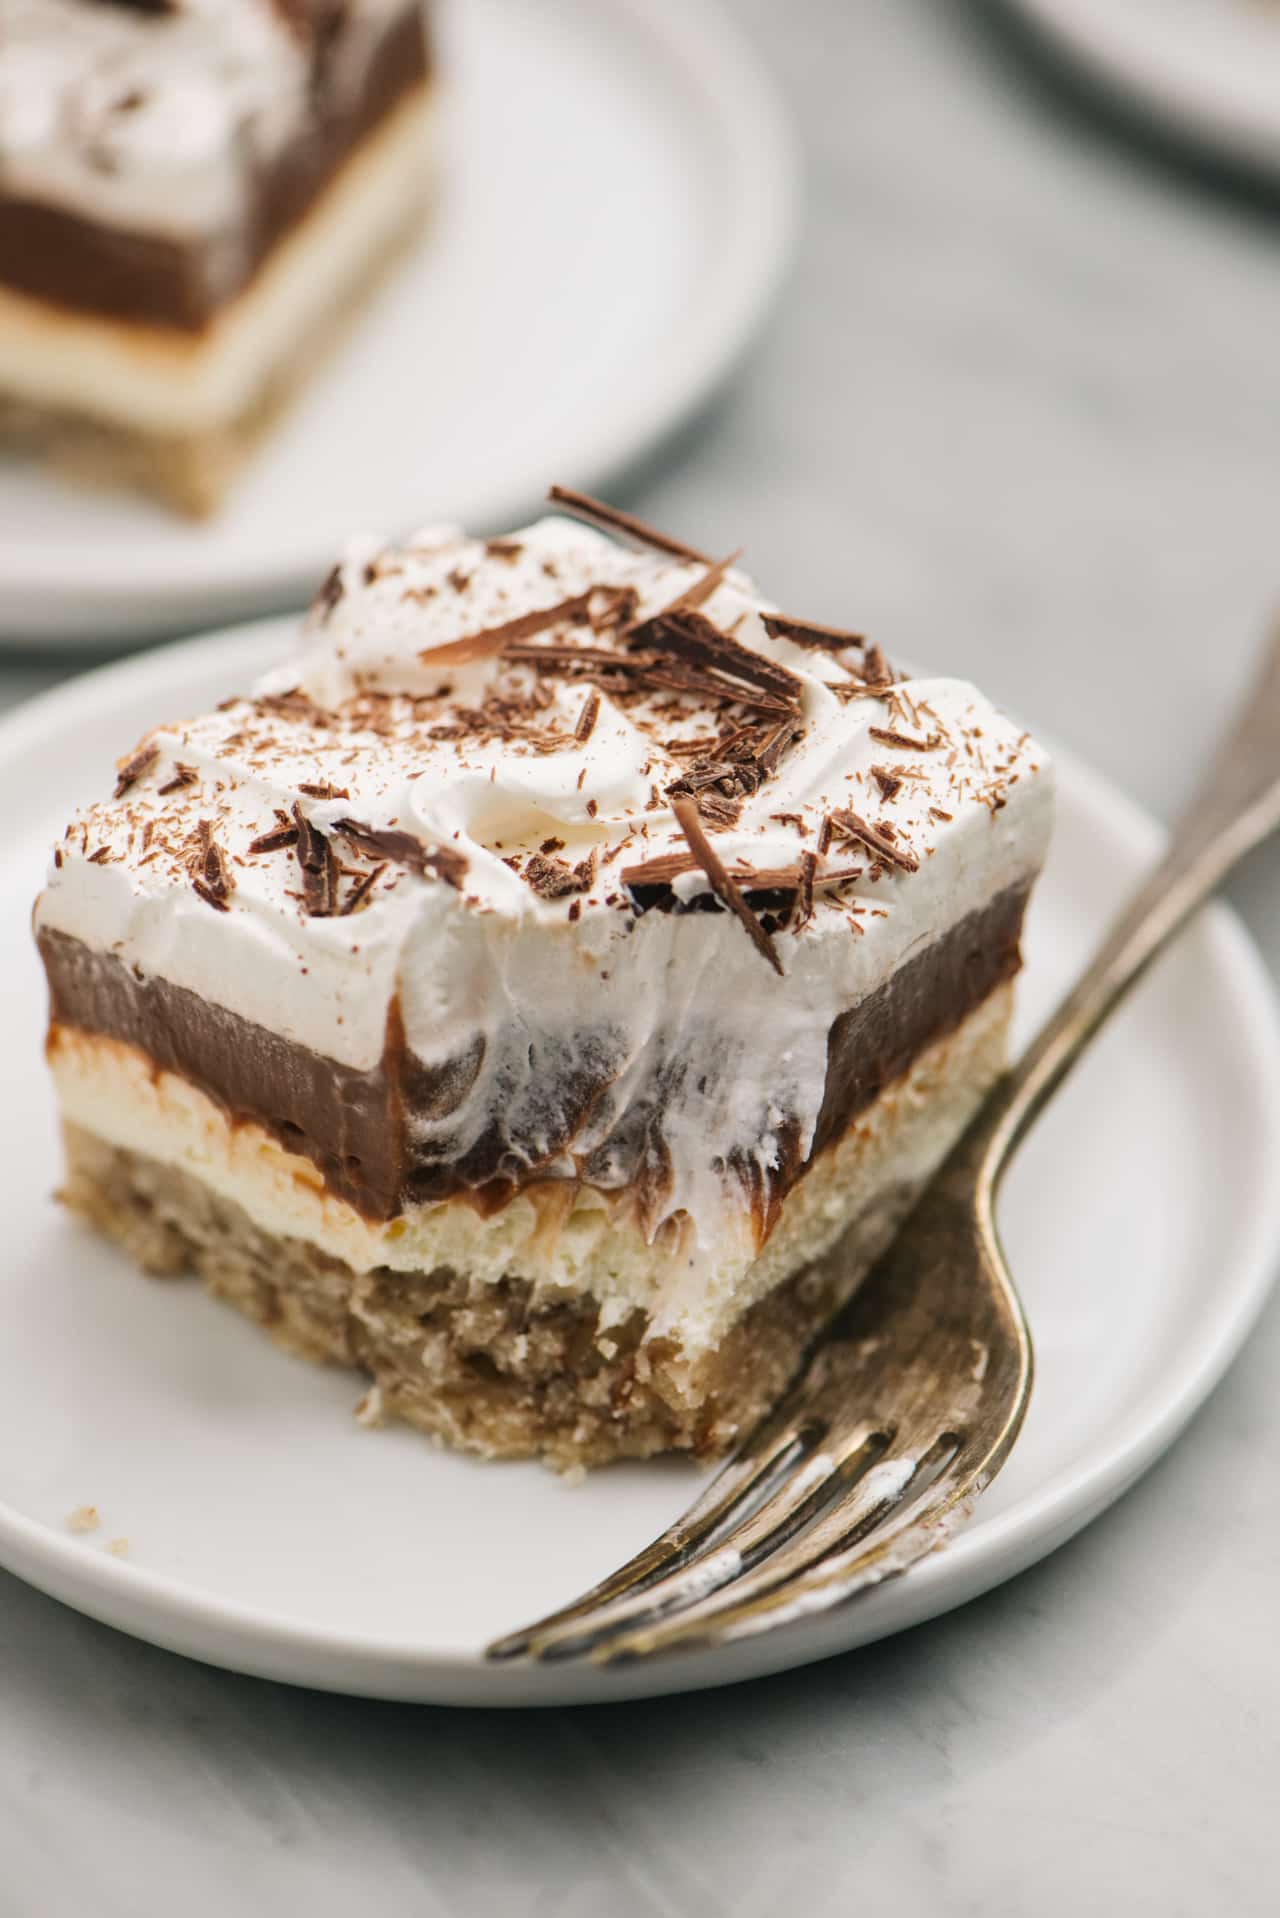 Chocolate Delight is a delicious layered pudding dessert. 